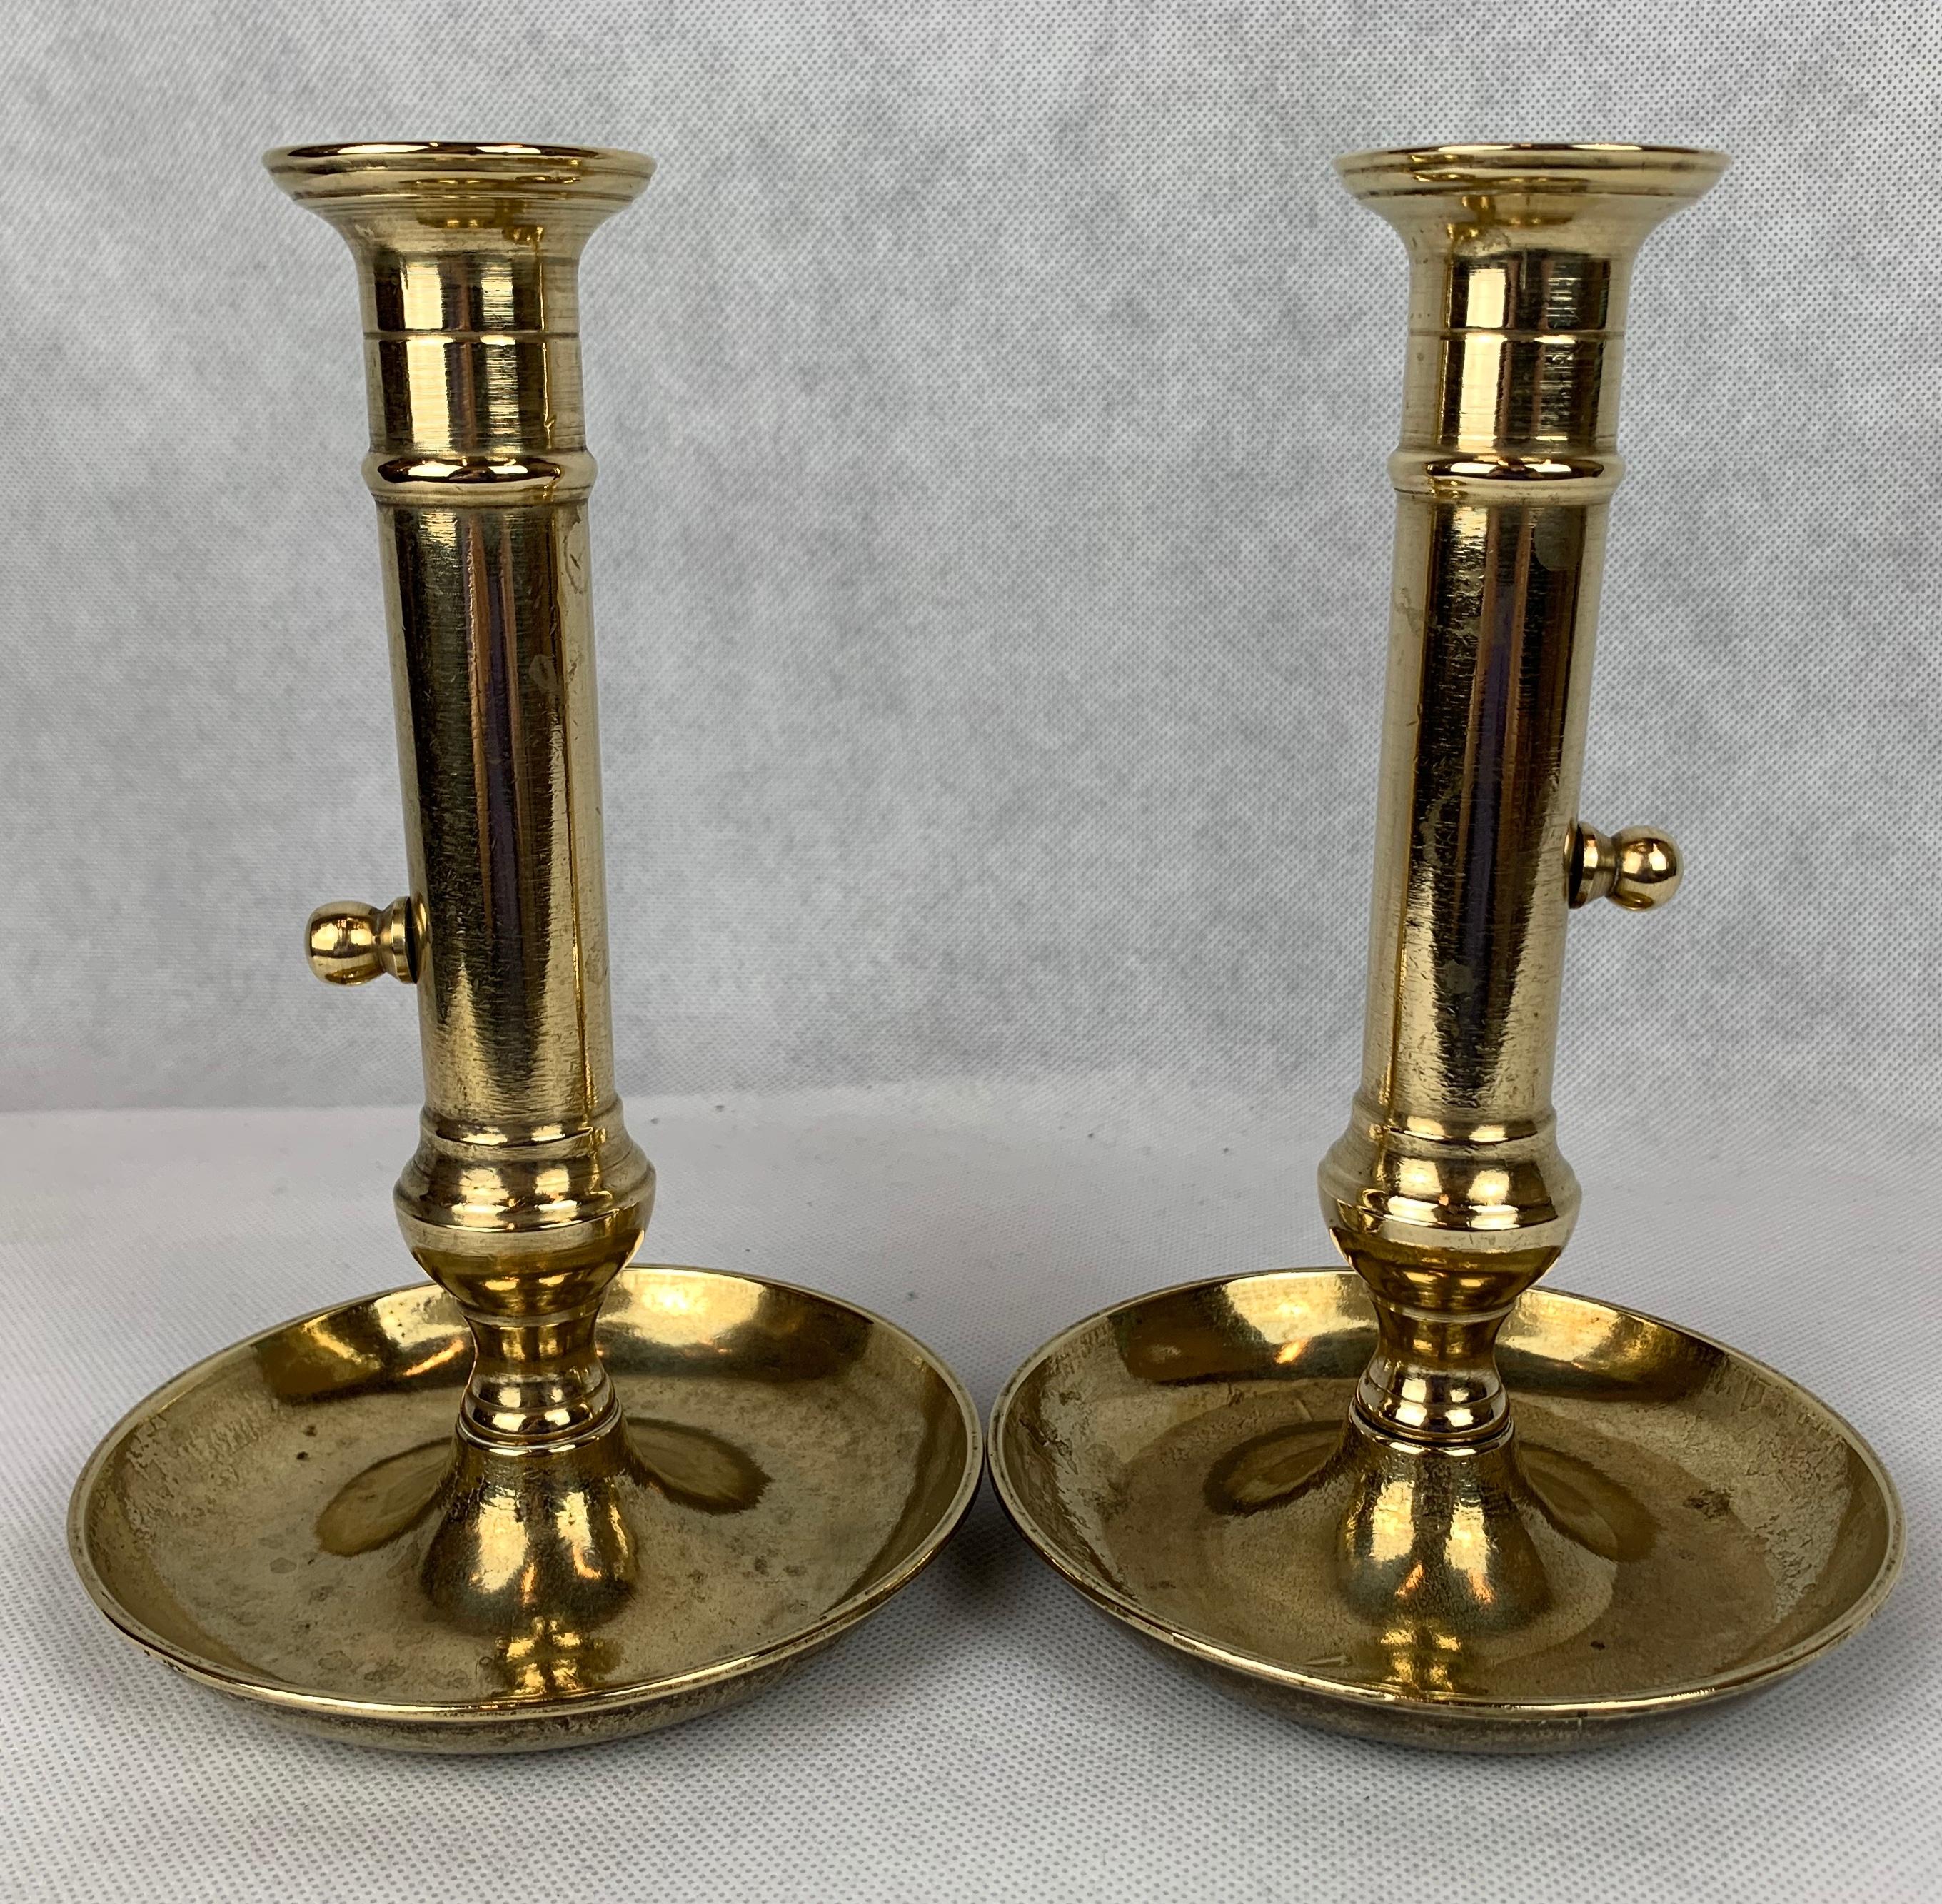 A pair of late 18th century solid brass side ejector chambersticks. The saucer base usually indicates they were used as 